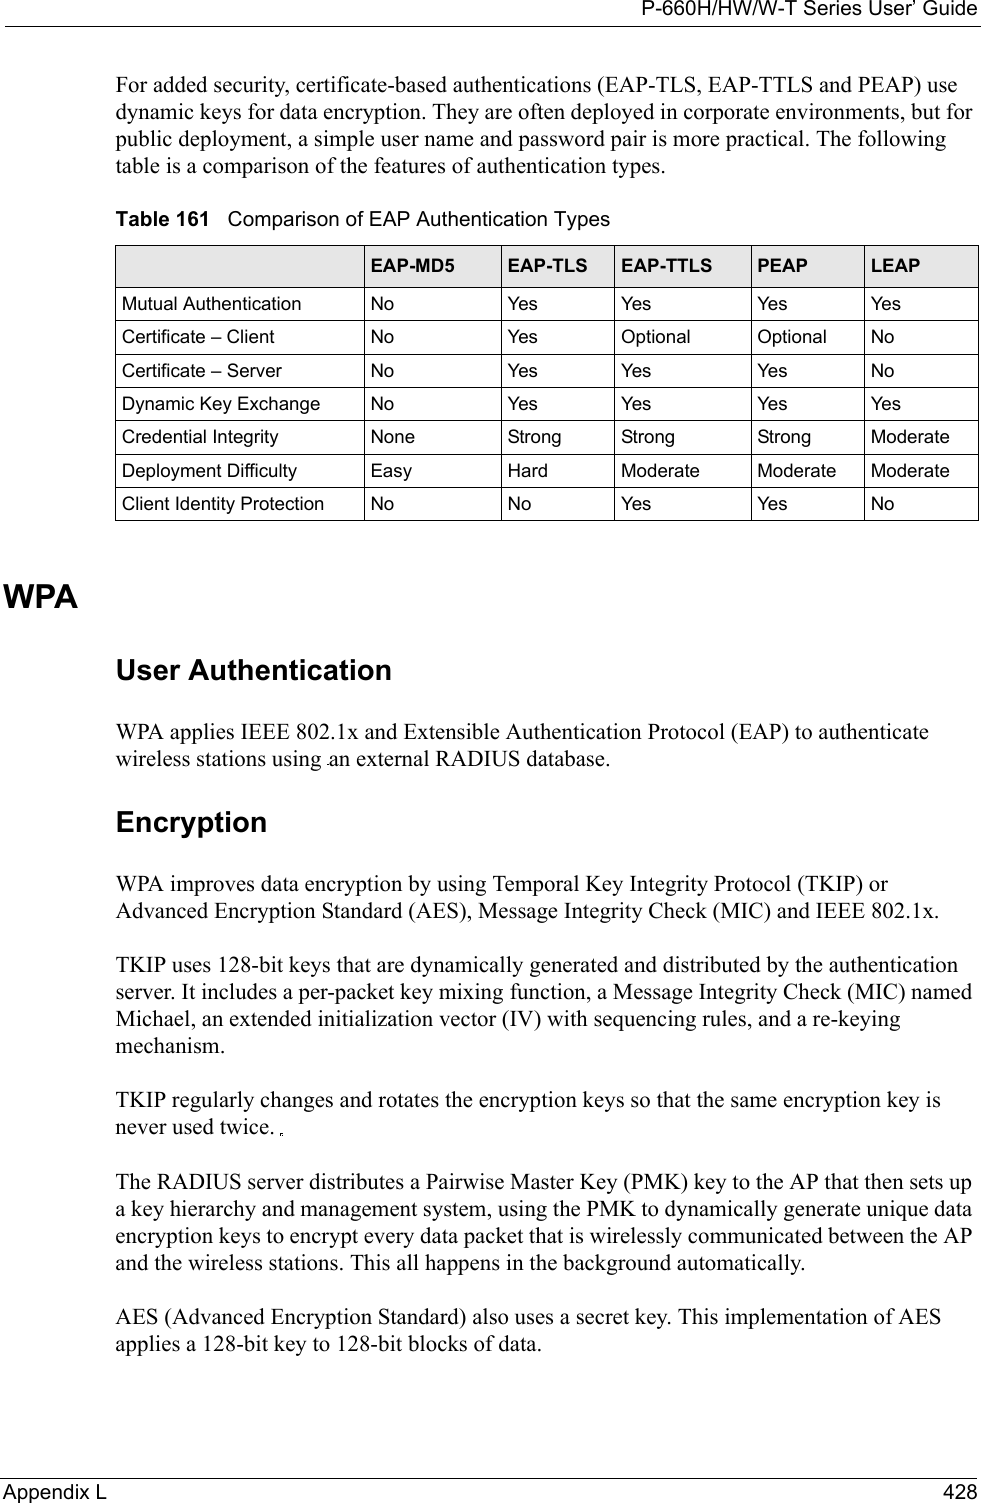 P-660H/HW/W-T Series User’ GuideAppendix L 428For added security, certificate-based authentications (EAP-TLS, EAP-TTLS and PEAP) use dynamic keys for data encryption. They are often deployed in corporate environments, but for public deployment, a simple user name and password pair is more practical. The following table is a comparison of the features of authentication types.WPAUser Authentication WPA applies IEEE 802.1x and Extensible Authentication Protocol (EAP) to authenticate wireless stations using an external RADIUS database. Encryption WPA improves data encryption by using Temporal Key Integrity Protocol (TKIP) or Advanced Encryption Standard (AES), Message Integrity Check (MIC) and IEEE 802.1x. TKIP uses 128-bit keys that are dynamically generated and distributed by the authentication server. It includes a per-packet key mixing function, a Message Integrity Check (MIC) named Michael, an extended initialization vector (IV) with sequencing rules, and a re-keying mechanism.TKIP regularly changes and rotates the encryption keys so that the same encryption key is never used twice. The RADIUS server distributes a Pairwise Master Key (PMK) key to the AP that then sets up a key hierarchy and management system, using the PMK to dynamically generate unique data encryption keys to encrypt every data packet that is wirelessly communicated between the AP and the wireless stations. This all happens in the background automatically.AES (Advanced Encryption Standard) also uses a secret key. This implementation of AES applies a 128-bit key to 128-bit blocks of data.Table 161   Comparison of EAP Authentication TypesEAP-MD5 EAP-TLS EAP-TTLS PEAP LEAPMutual Authentication No Yes Yes Yes YesCertificate – Client No Yes Optional Optional NoCertificate – Server No Yes Yes Yes NoDynamic Key Exchange No Yes Yes Yes YesCredential Integrity None Strong Strong Strong ModerateDeployment Difficulty Easy Hard Moderate Moderate ModerateClient Identity Protection No No Yes Yes No